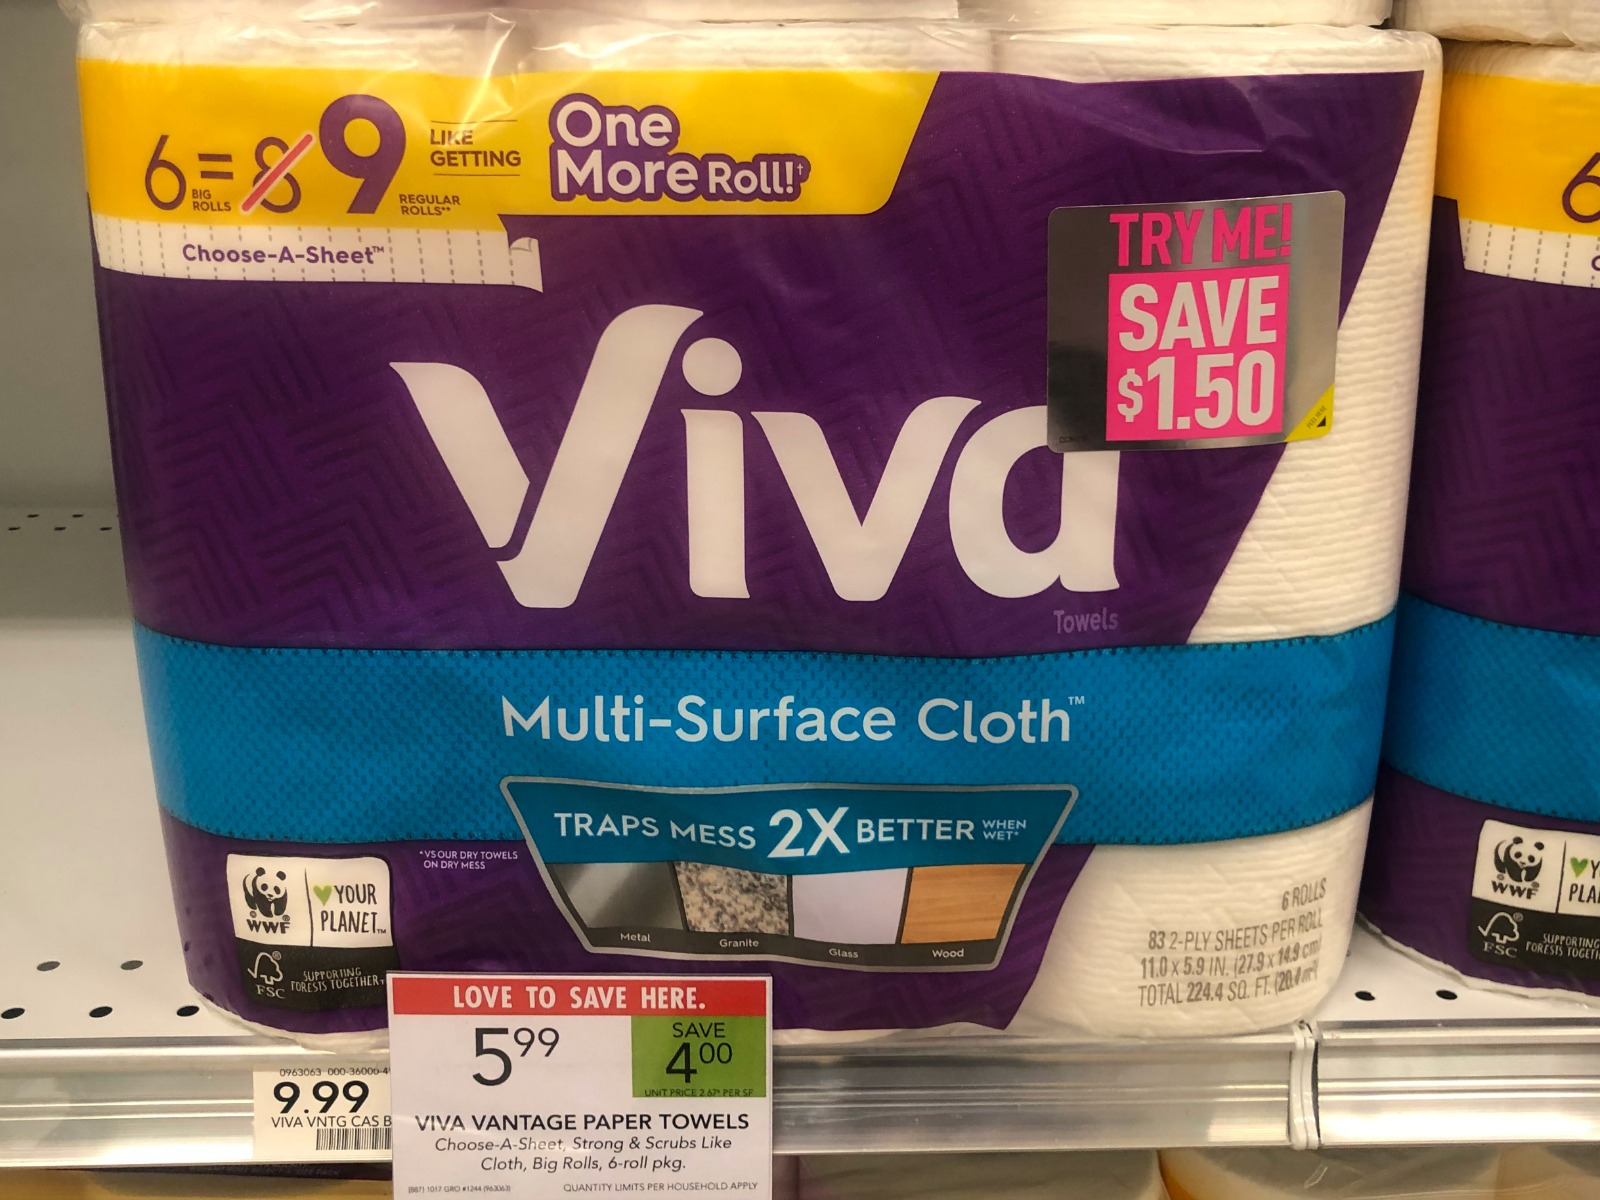 Fantastic Deals On Cottonelle Toilet Paper And Viva Paper Towels This Week At Publix - Time To Stock Your Cart! on I Heart Publix 1